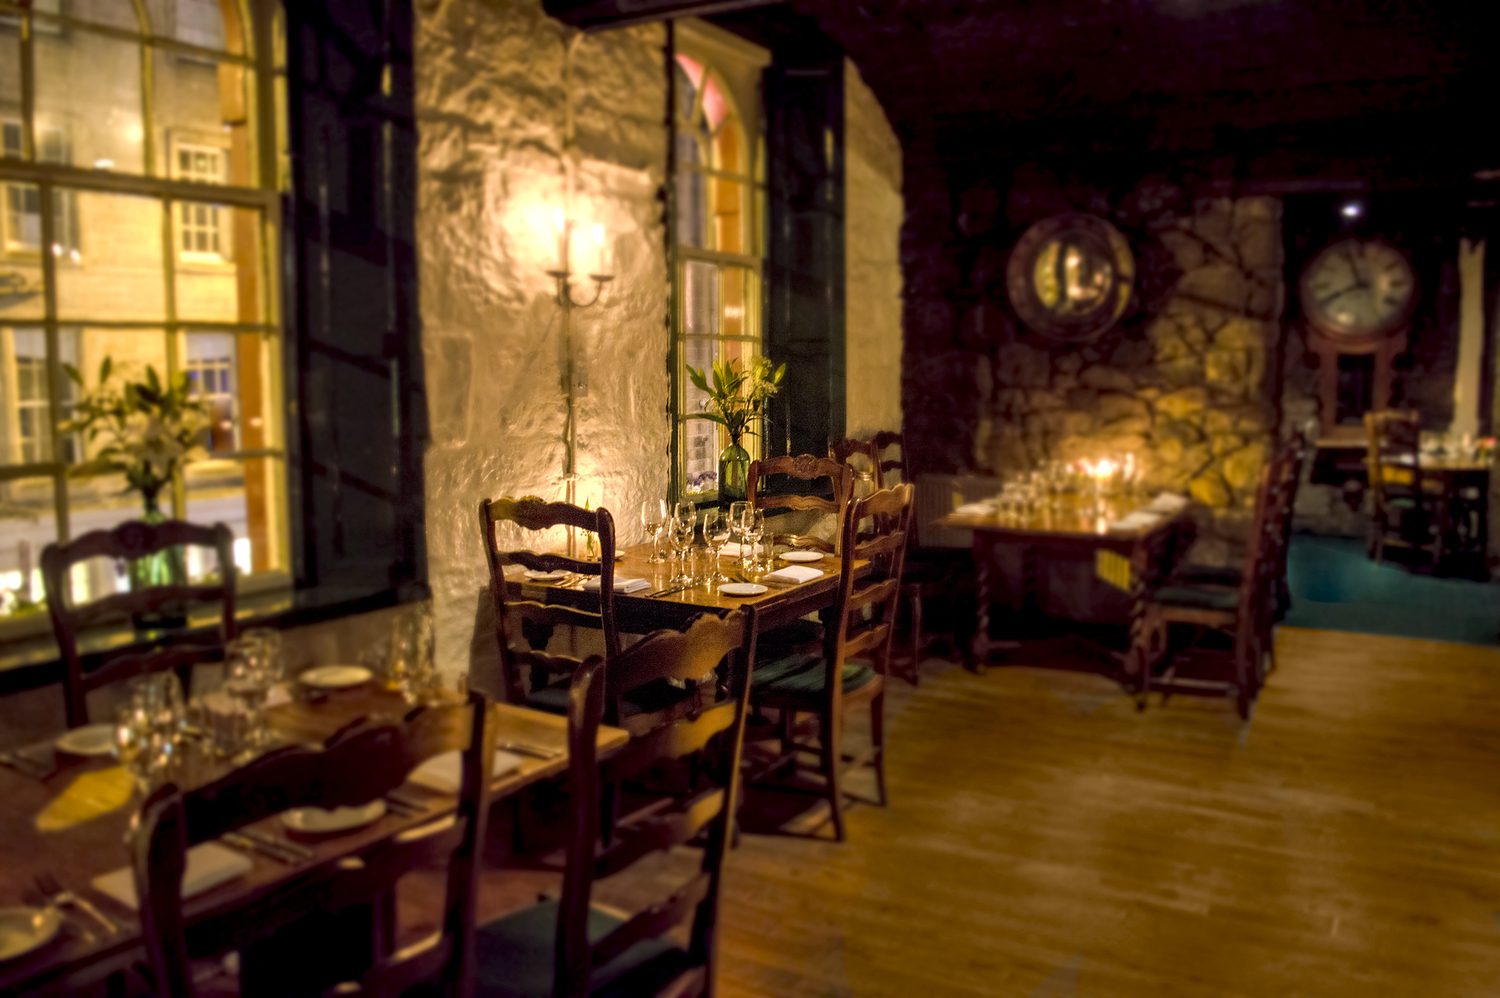 These are the most romantic restaurants in Edinburgh according to Trip